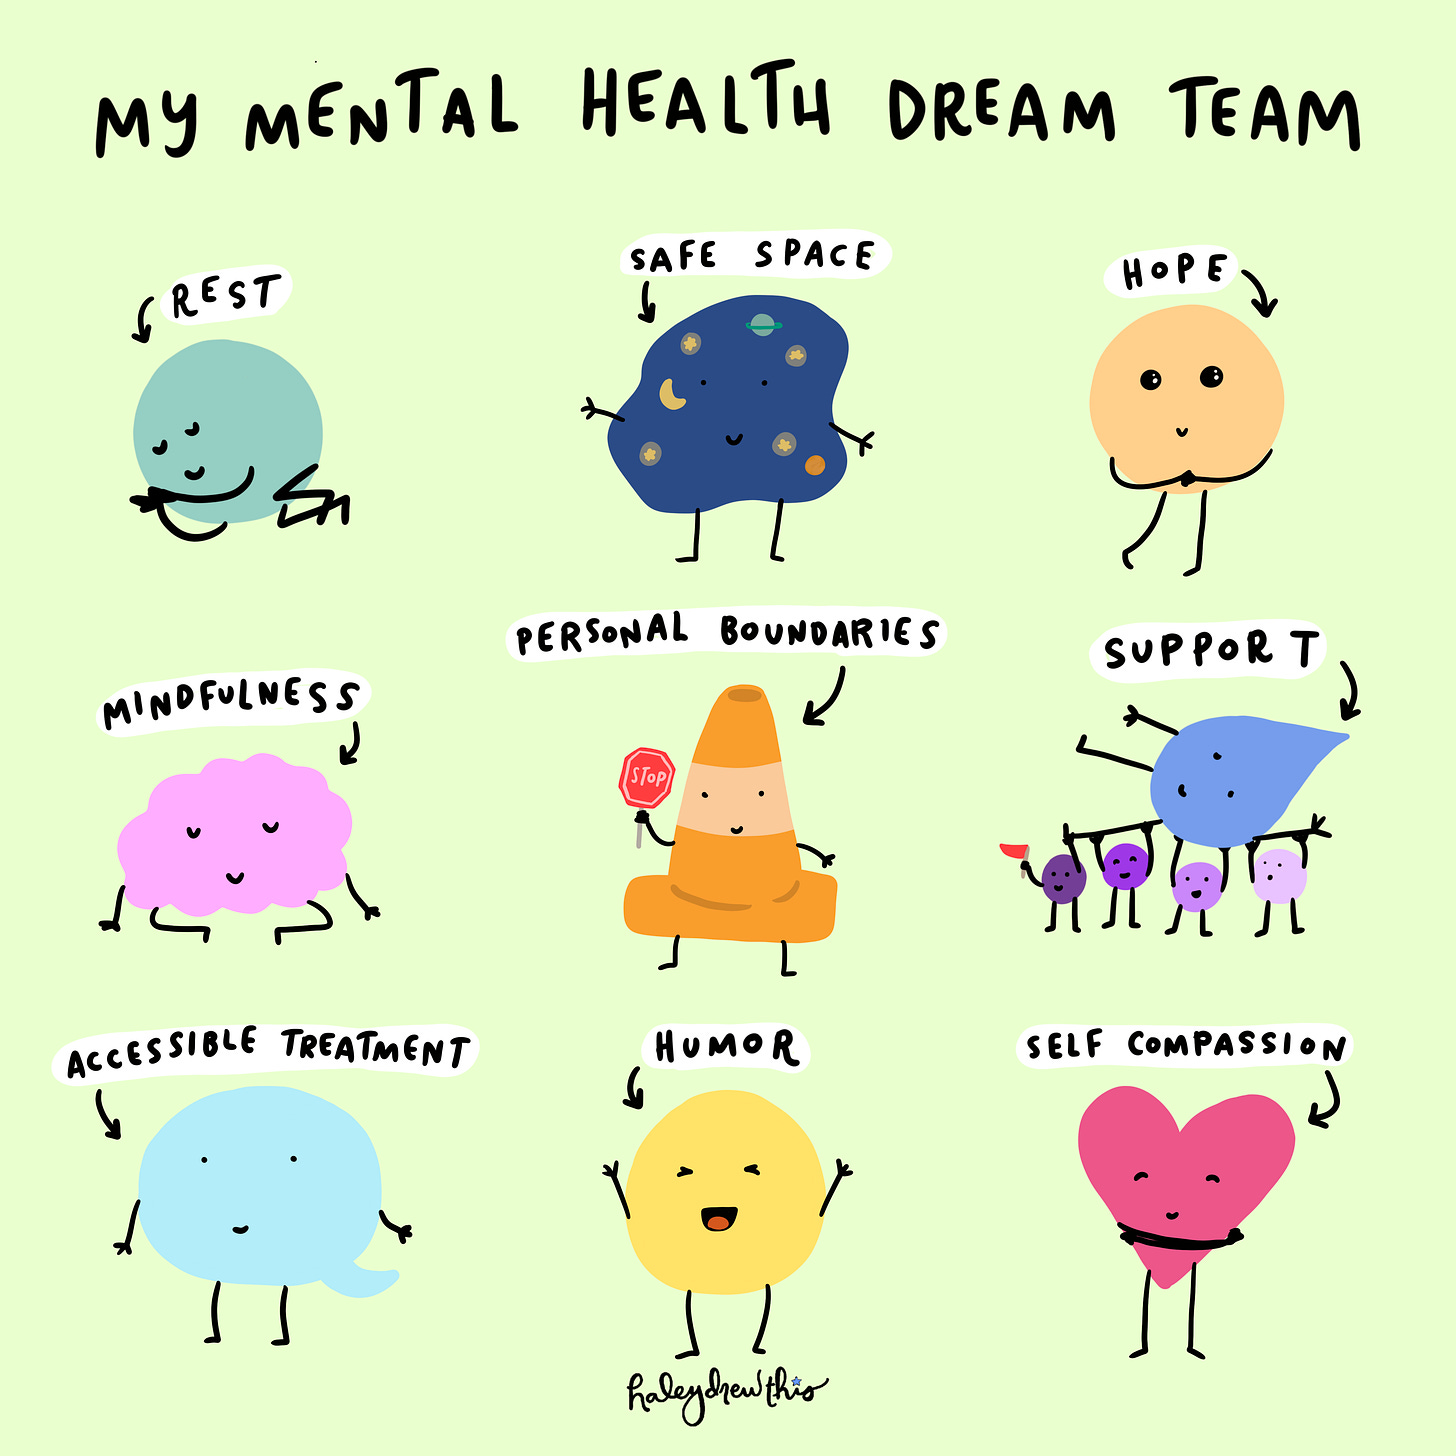 The text reads: "My mental health dream team: rest, safe space, hope, mindfulness, personal boundaries, support, accessible treatment, humor, self compassion"